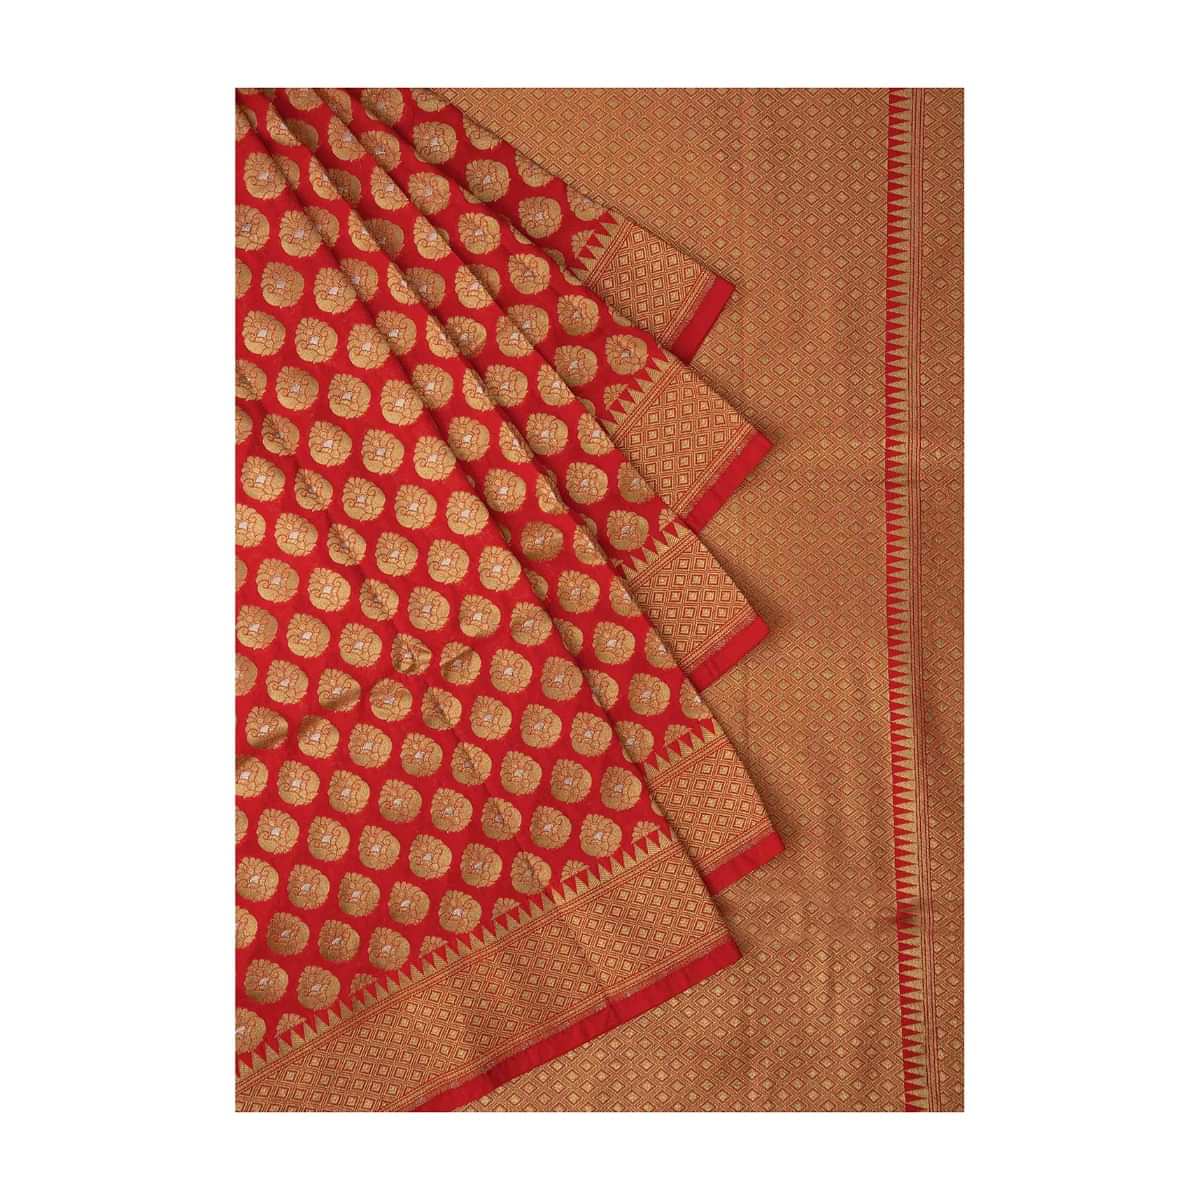 Cherry Red Saree In Chanderi Silk With Weaved Buttis And Geometric Motif On The Pallu And Border Online - Kalki Fashion